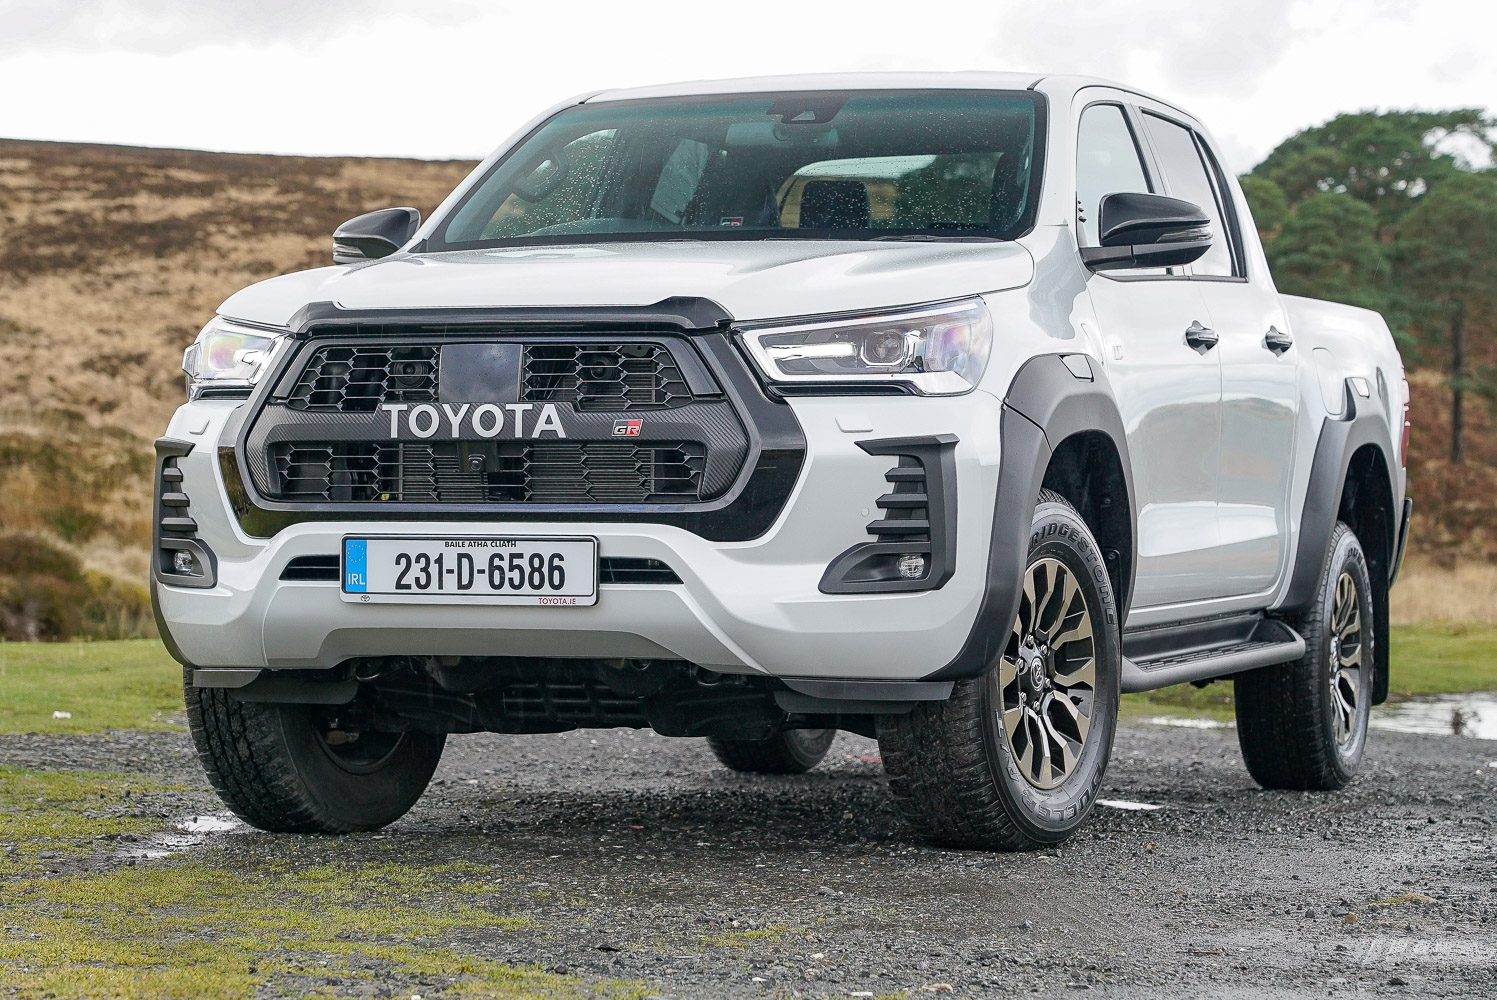 Can I use a Toyota Hilux for private use?